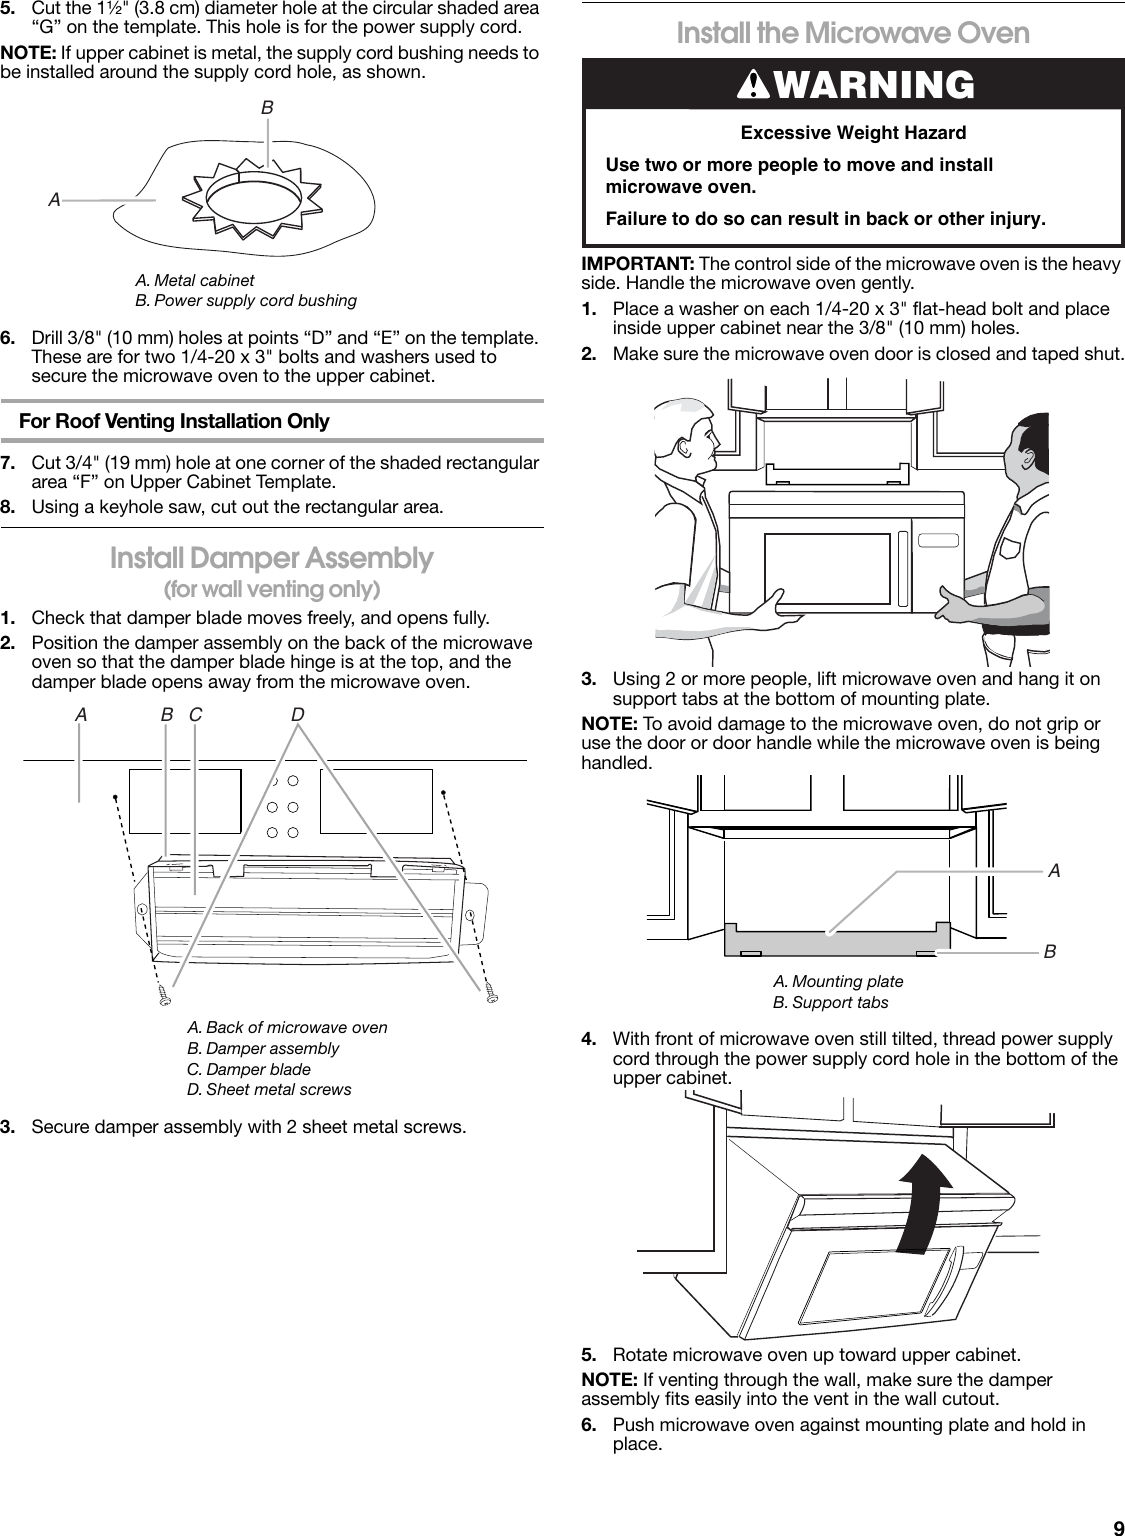 Page 9 of 12 - Whirlpool Whirlpool-W10238252A-Users-Manual- W10238252A  Whirlpool-w10238252a-users-manual